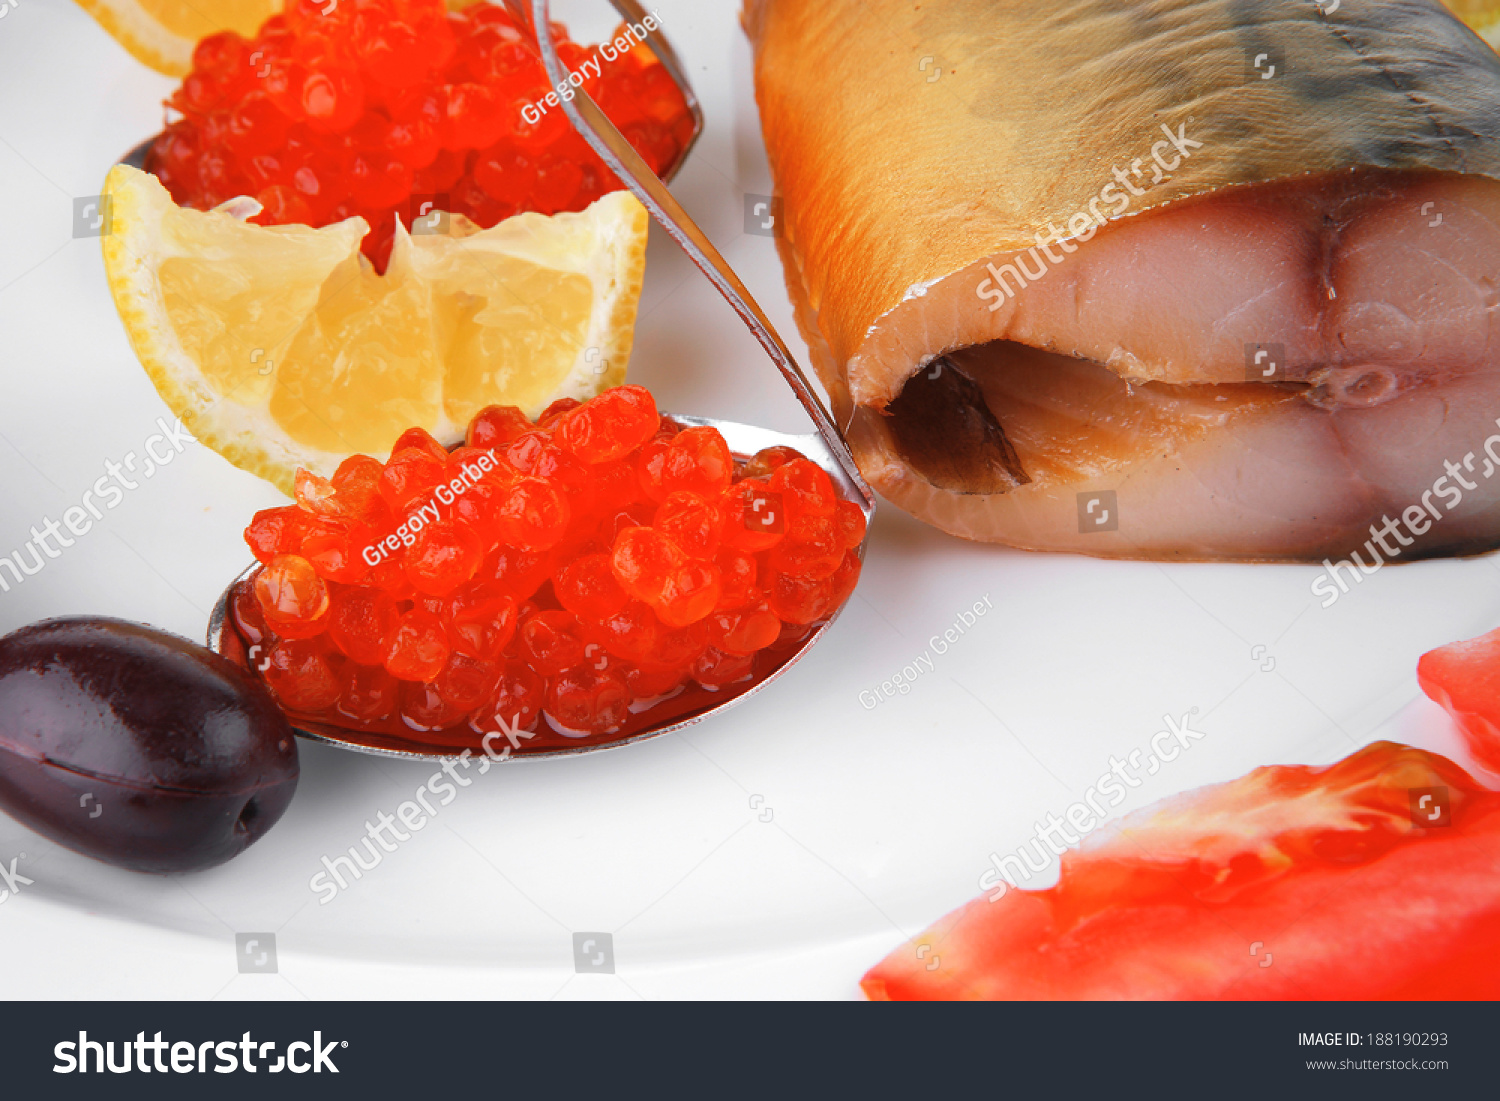 diet food - red caviar and smoked mackerel fish with lemon tomatoes and bread on white china plate isolated over white background #188190293